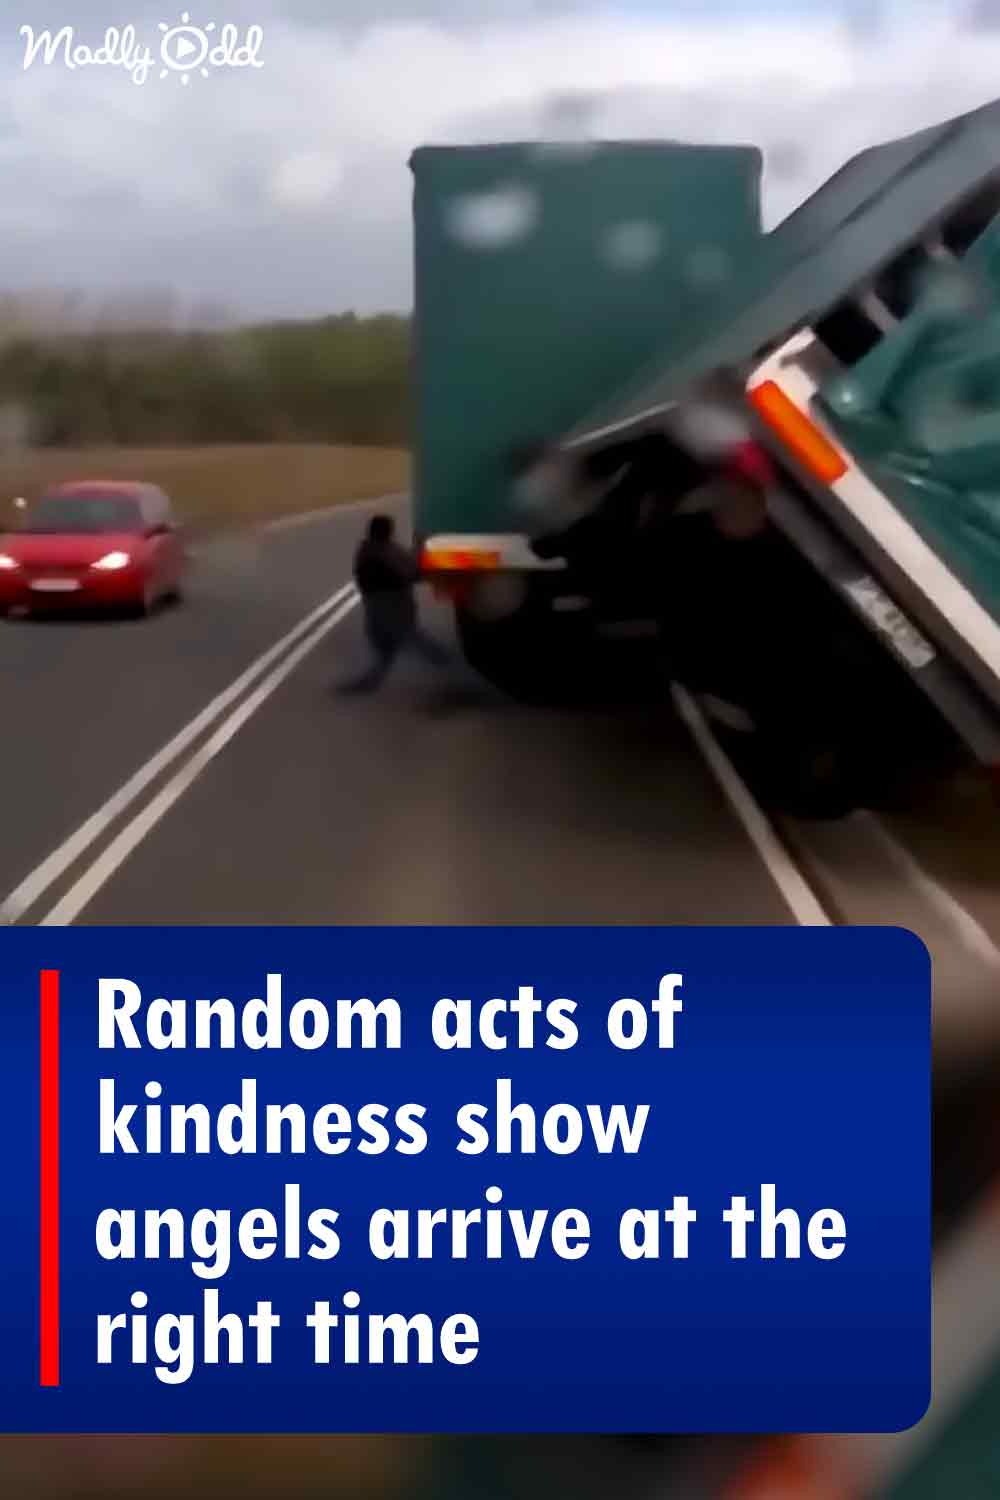 Random acts of kindness show angels arrive at the right time